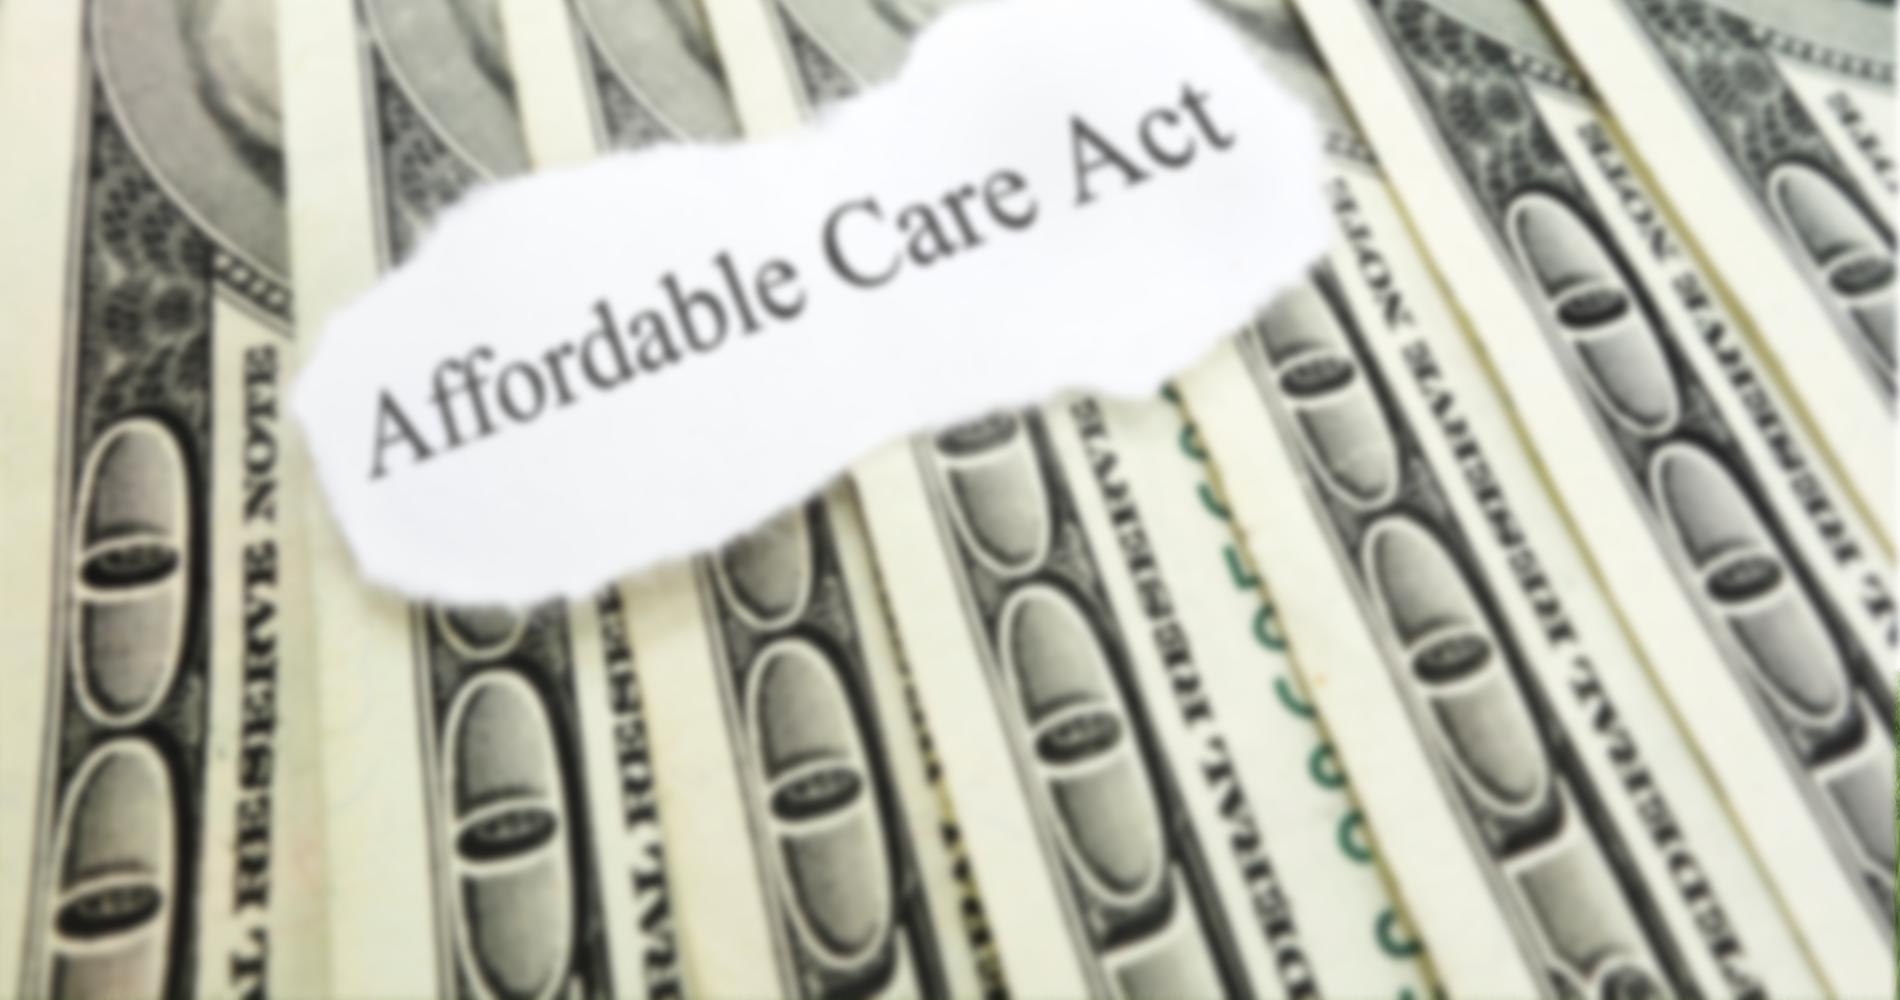 Affordable Care Act Rates Rising